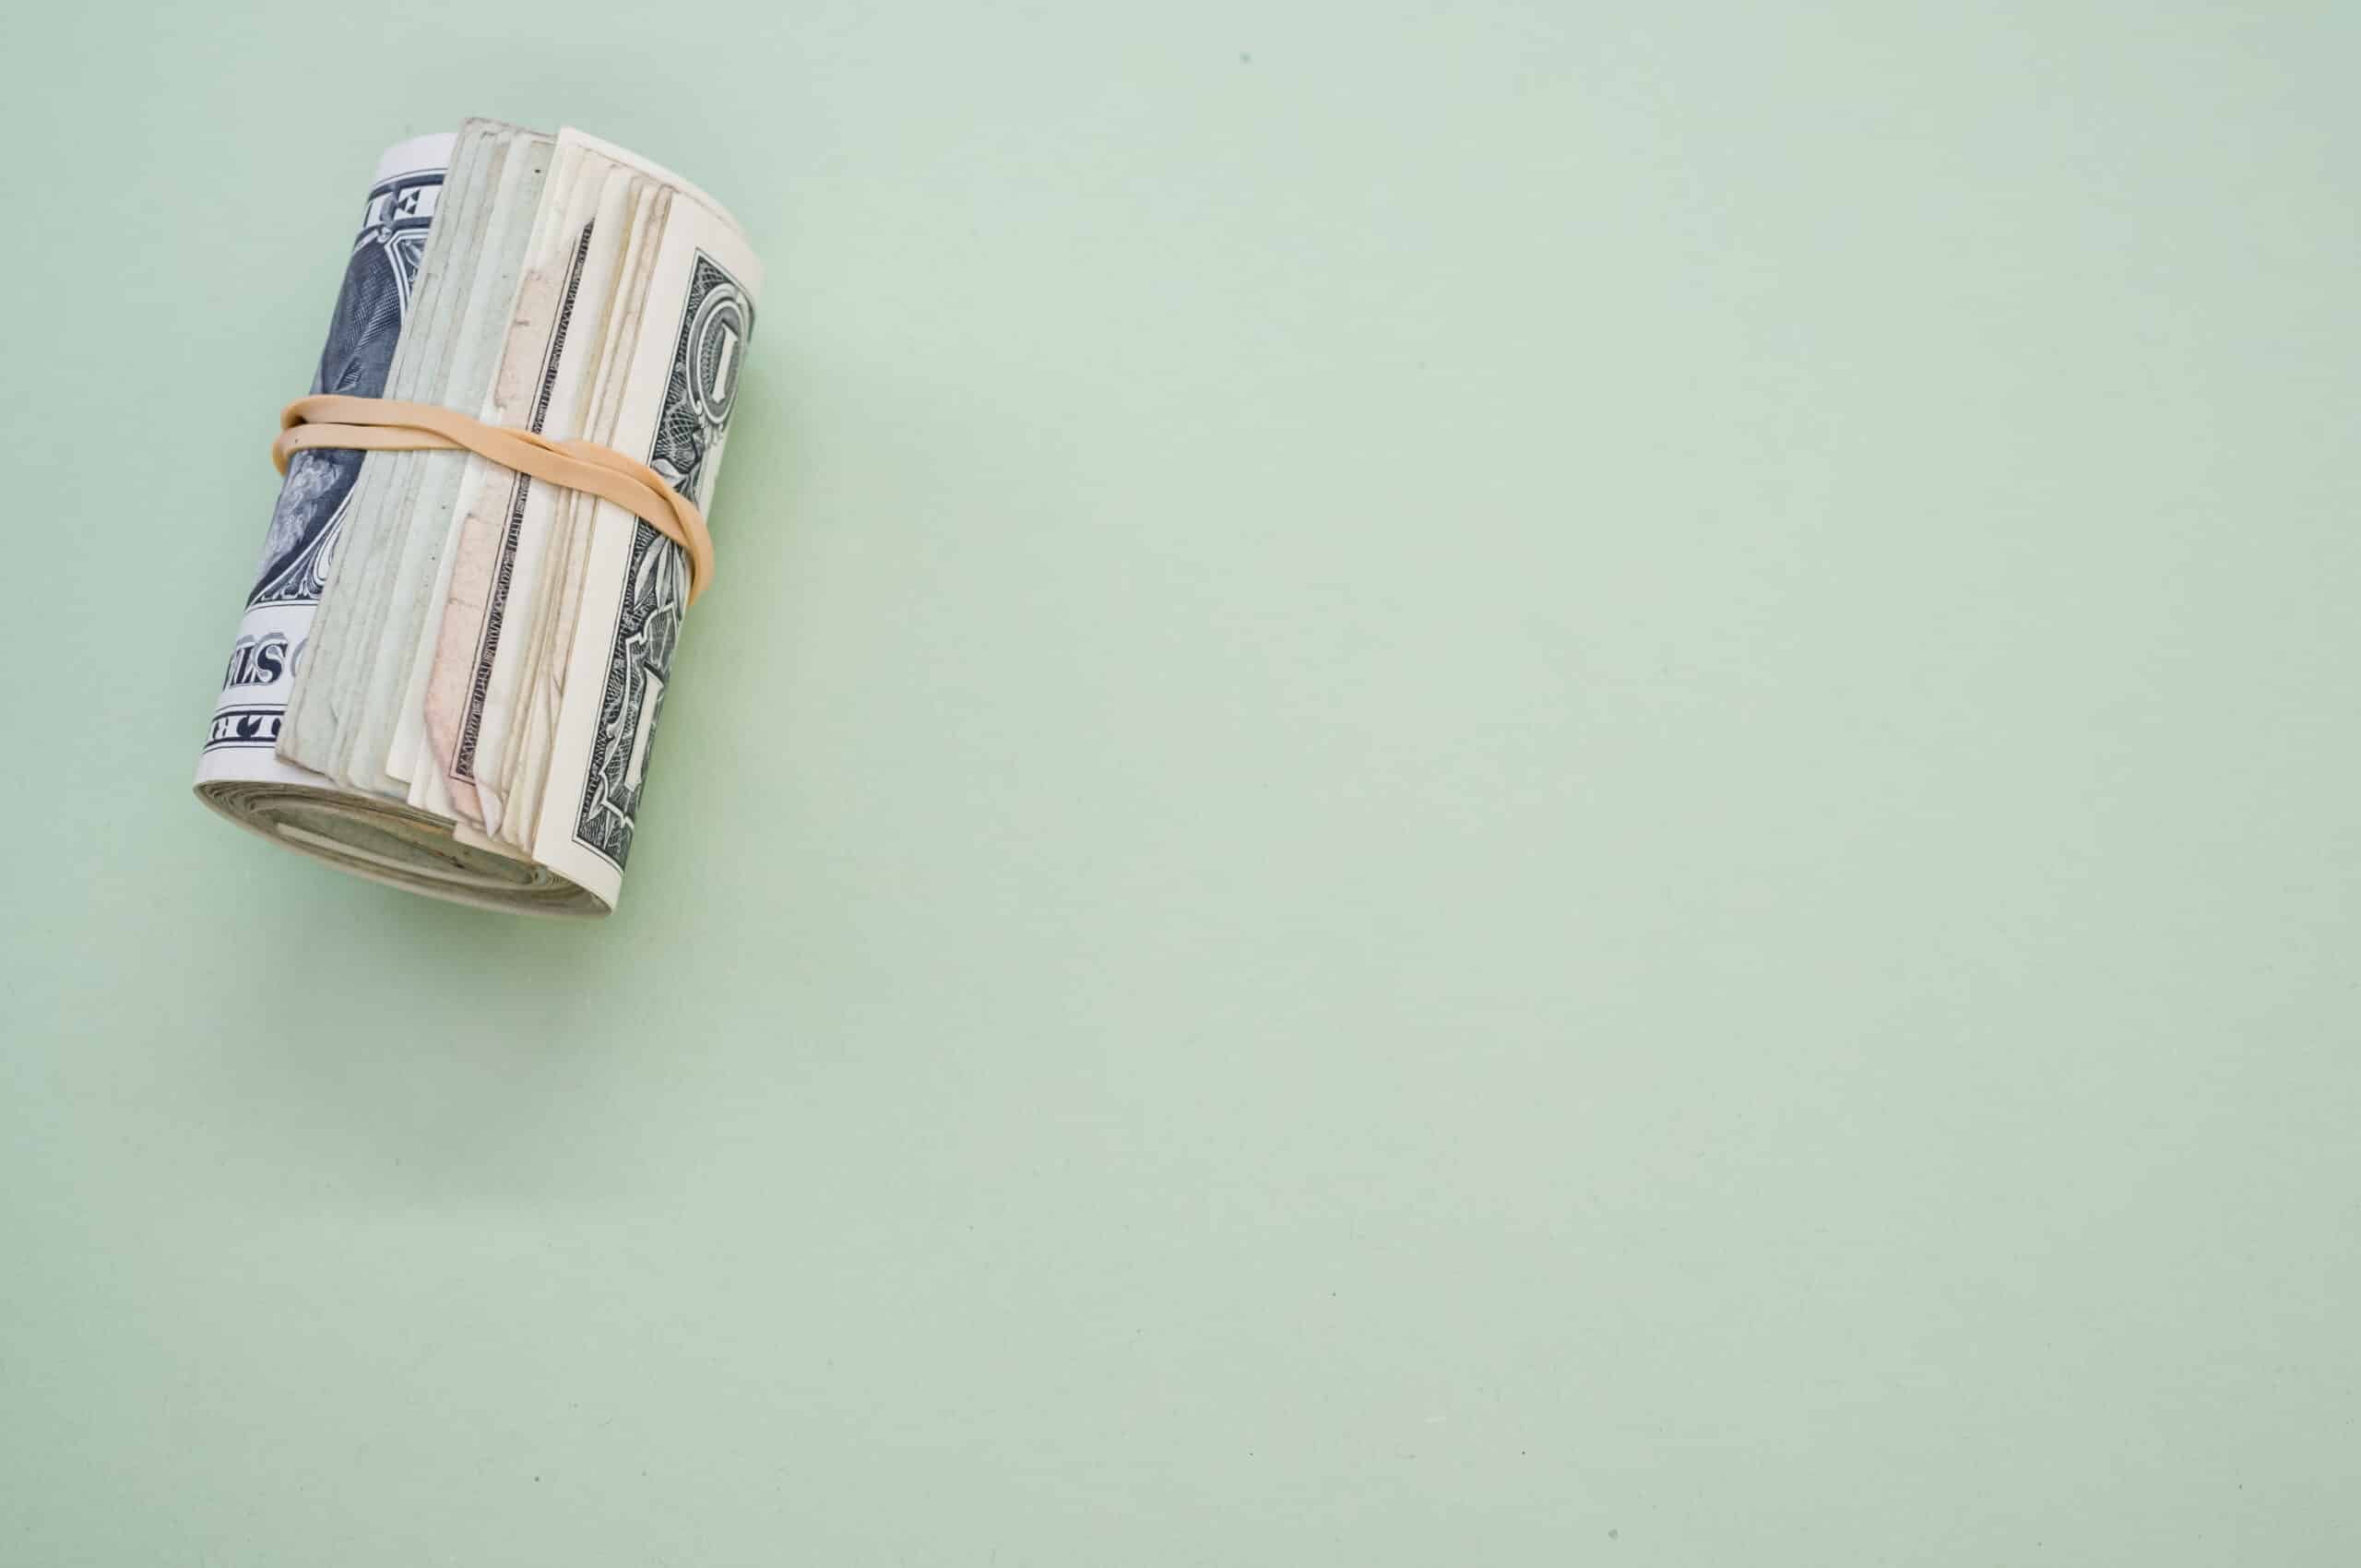 cash on green background for article how to make money selling your poop